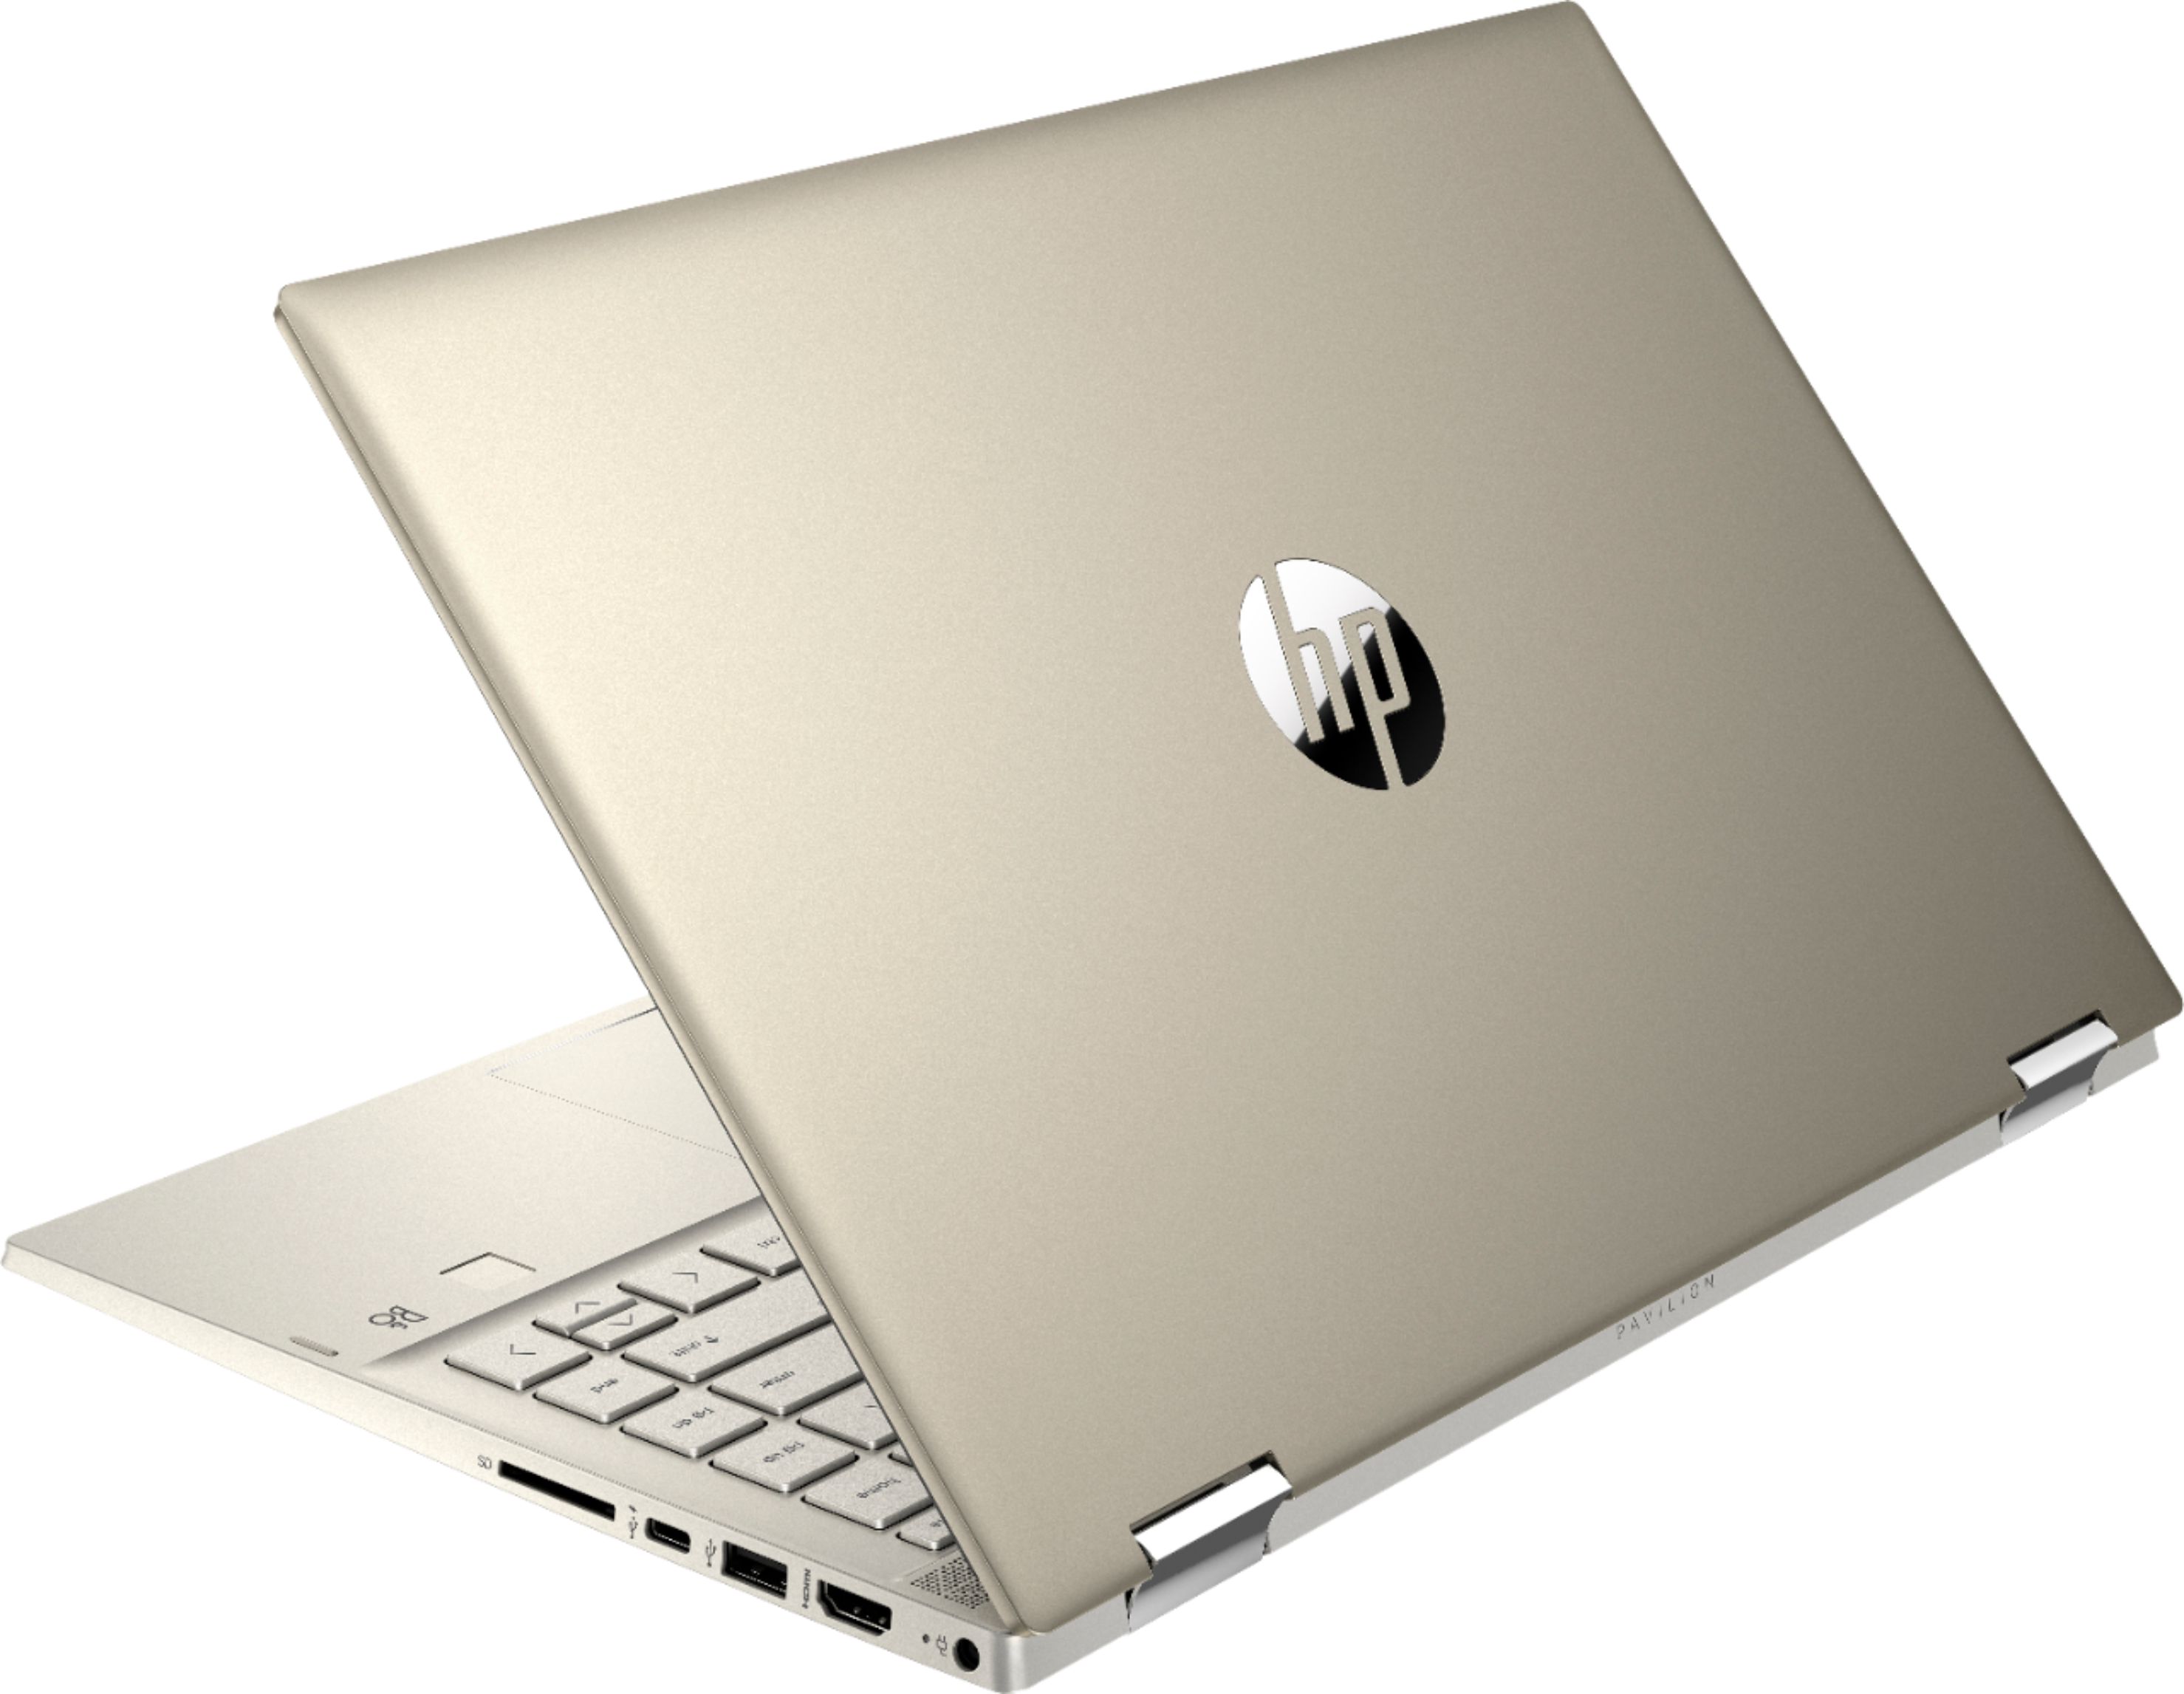 Hp Pavilion X360 2 In 1 14 Touch Screen Laptop Intel Core I5 8gb Memory 256gb Ssd Luminous Gold 14m Dw0023dx Best Buy